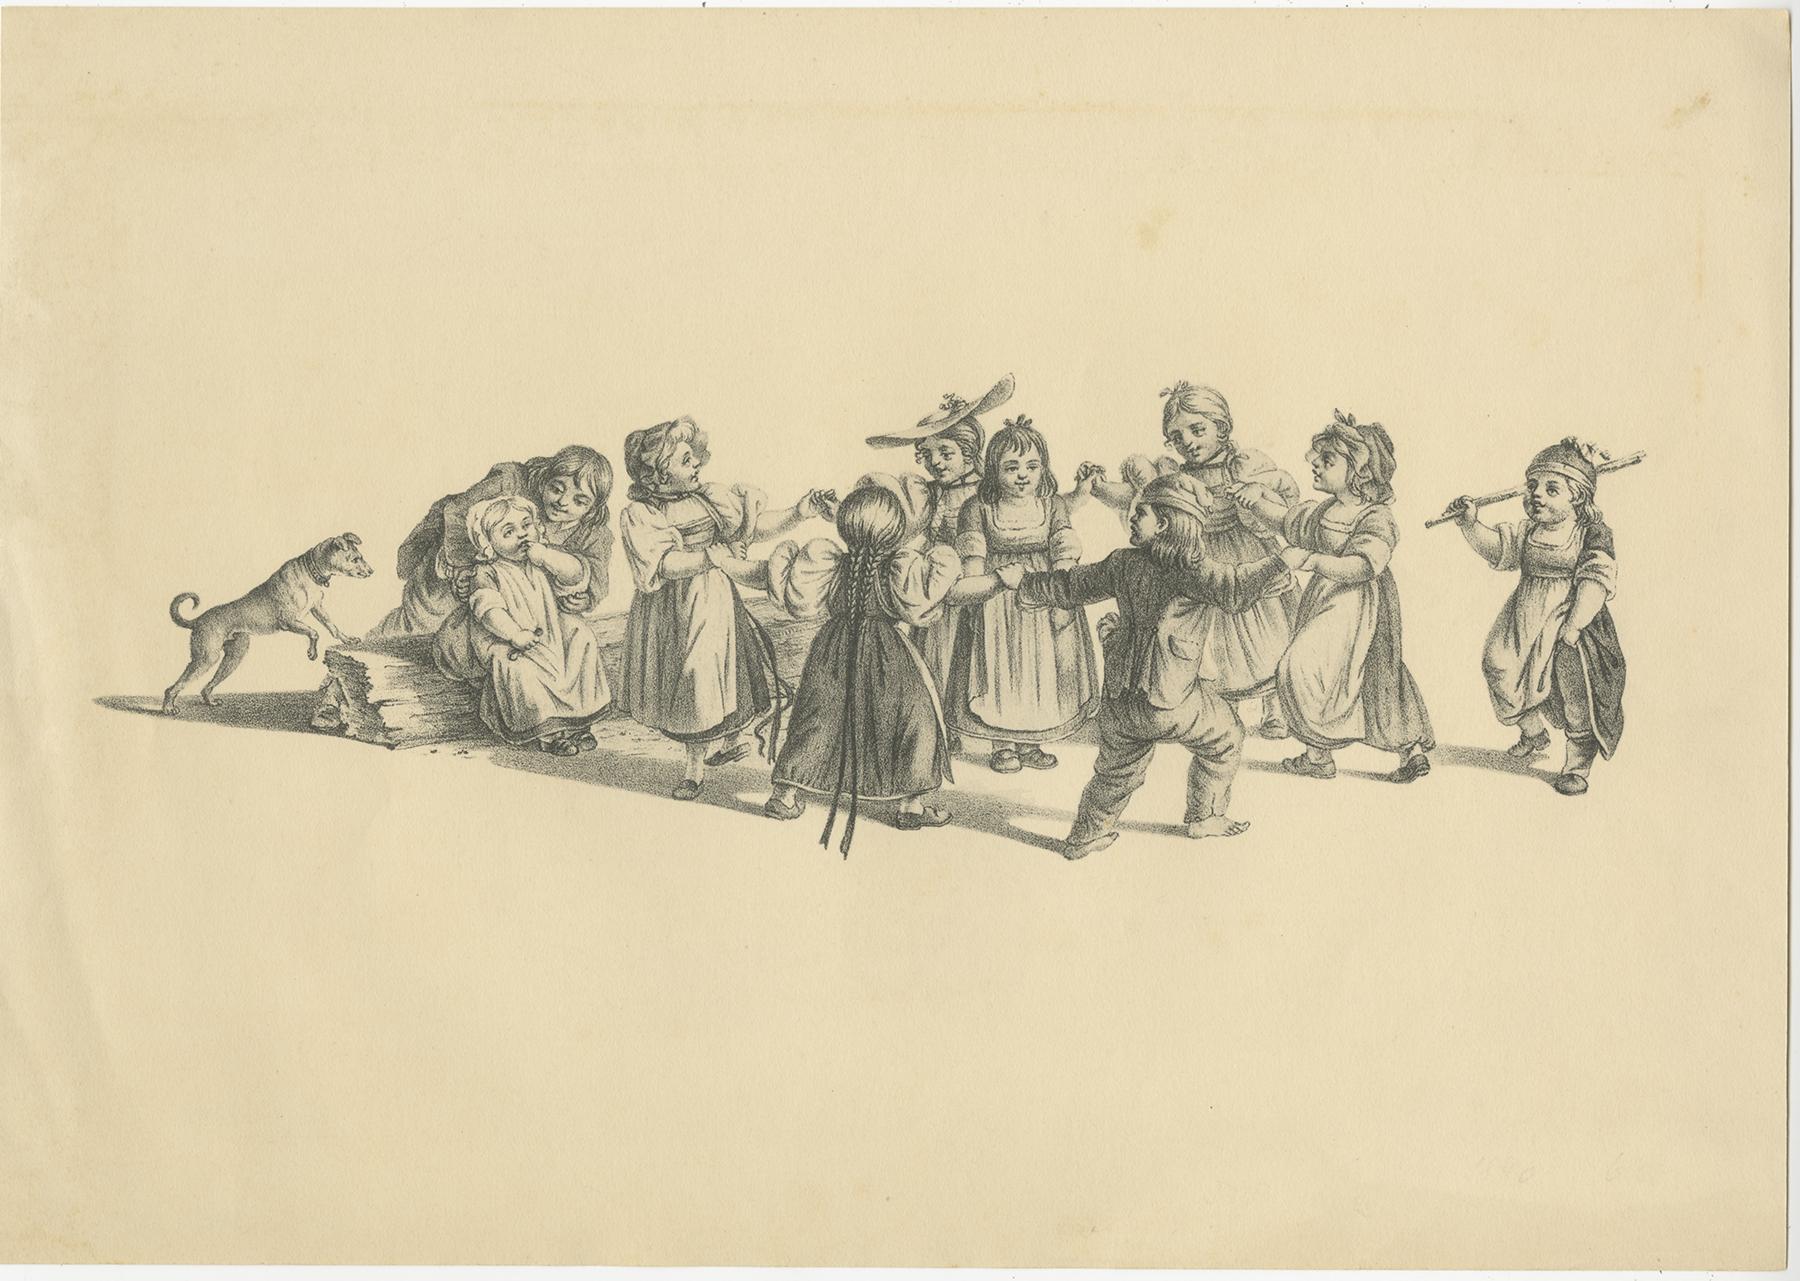 Untitled antique print of a group of children dancing in a circle. One of the children is sitting on a tree trunk comforted by a parent, a dog is watching. Source unknown to be determined. Published circa 1840.